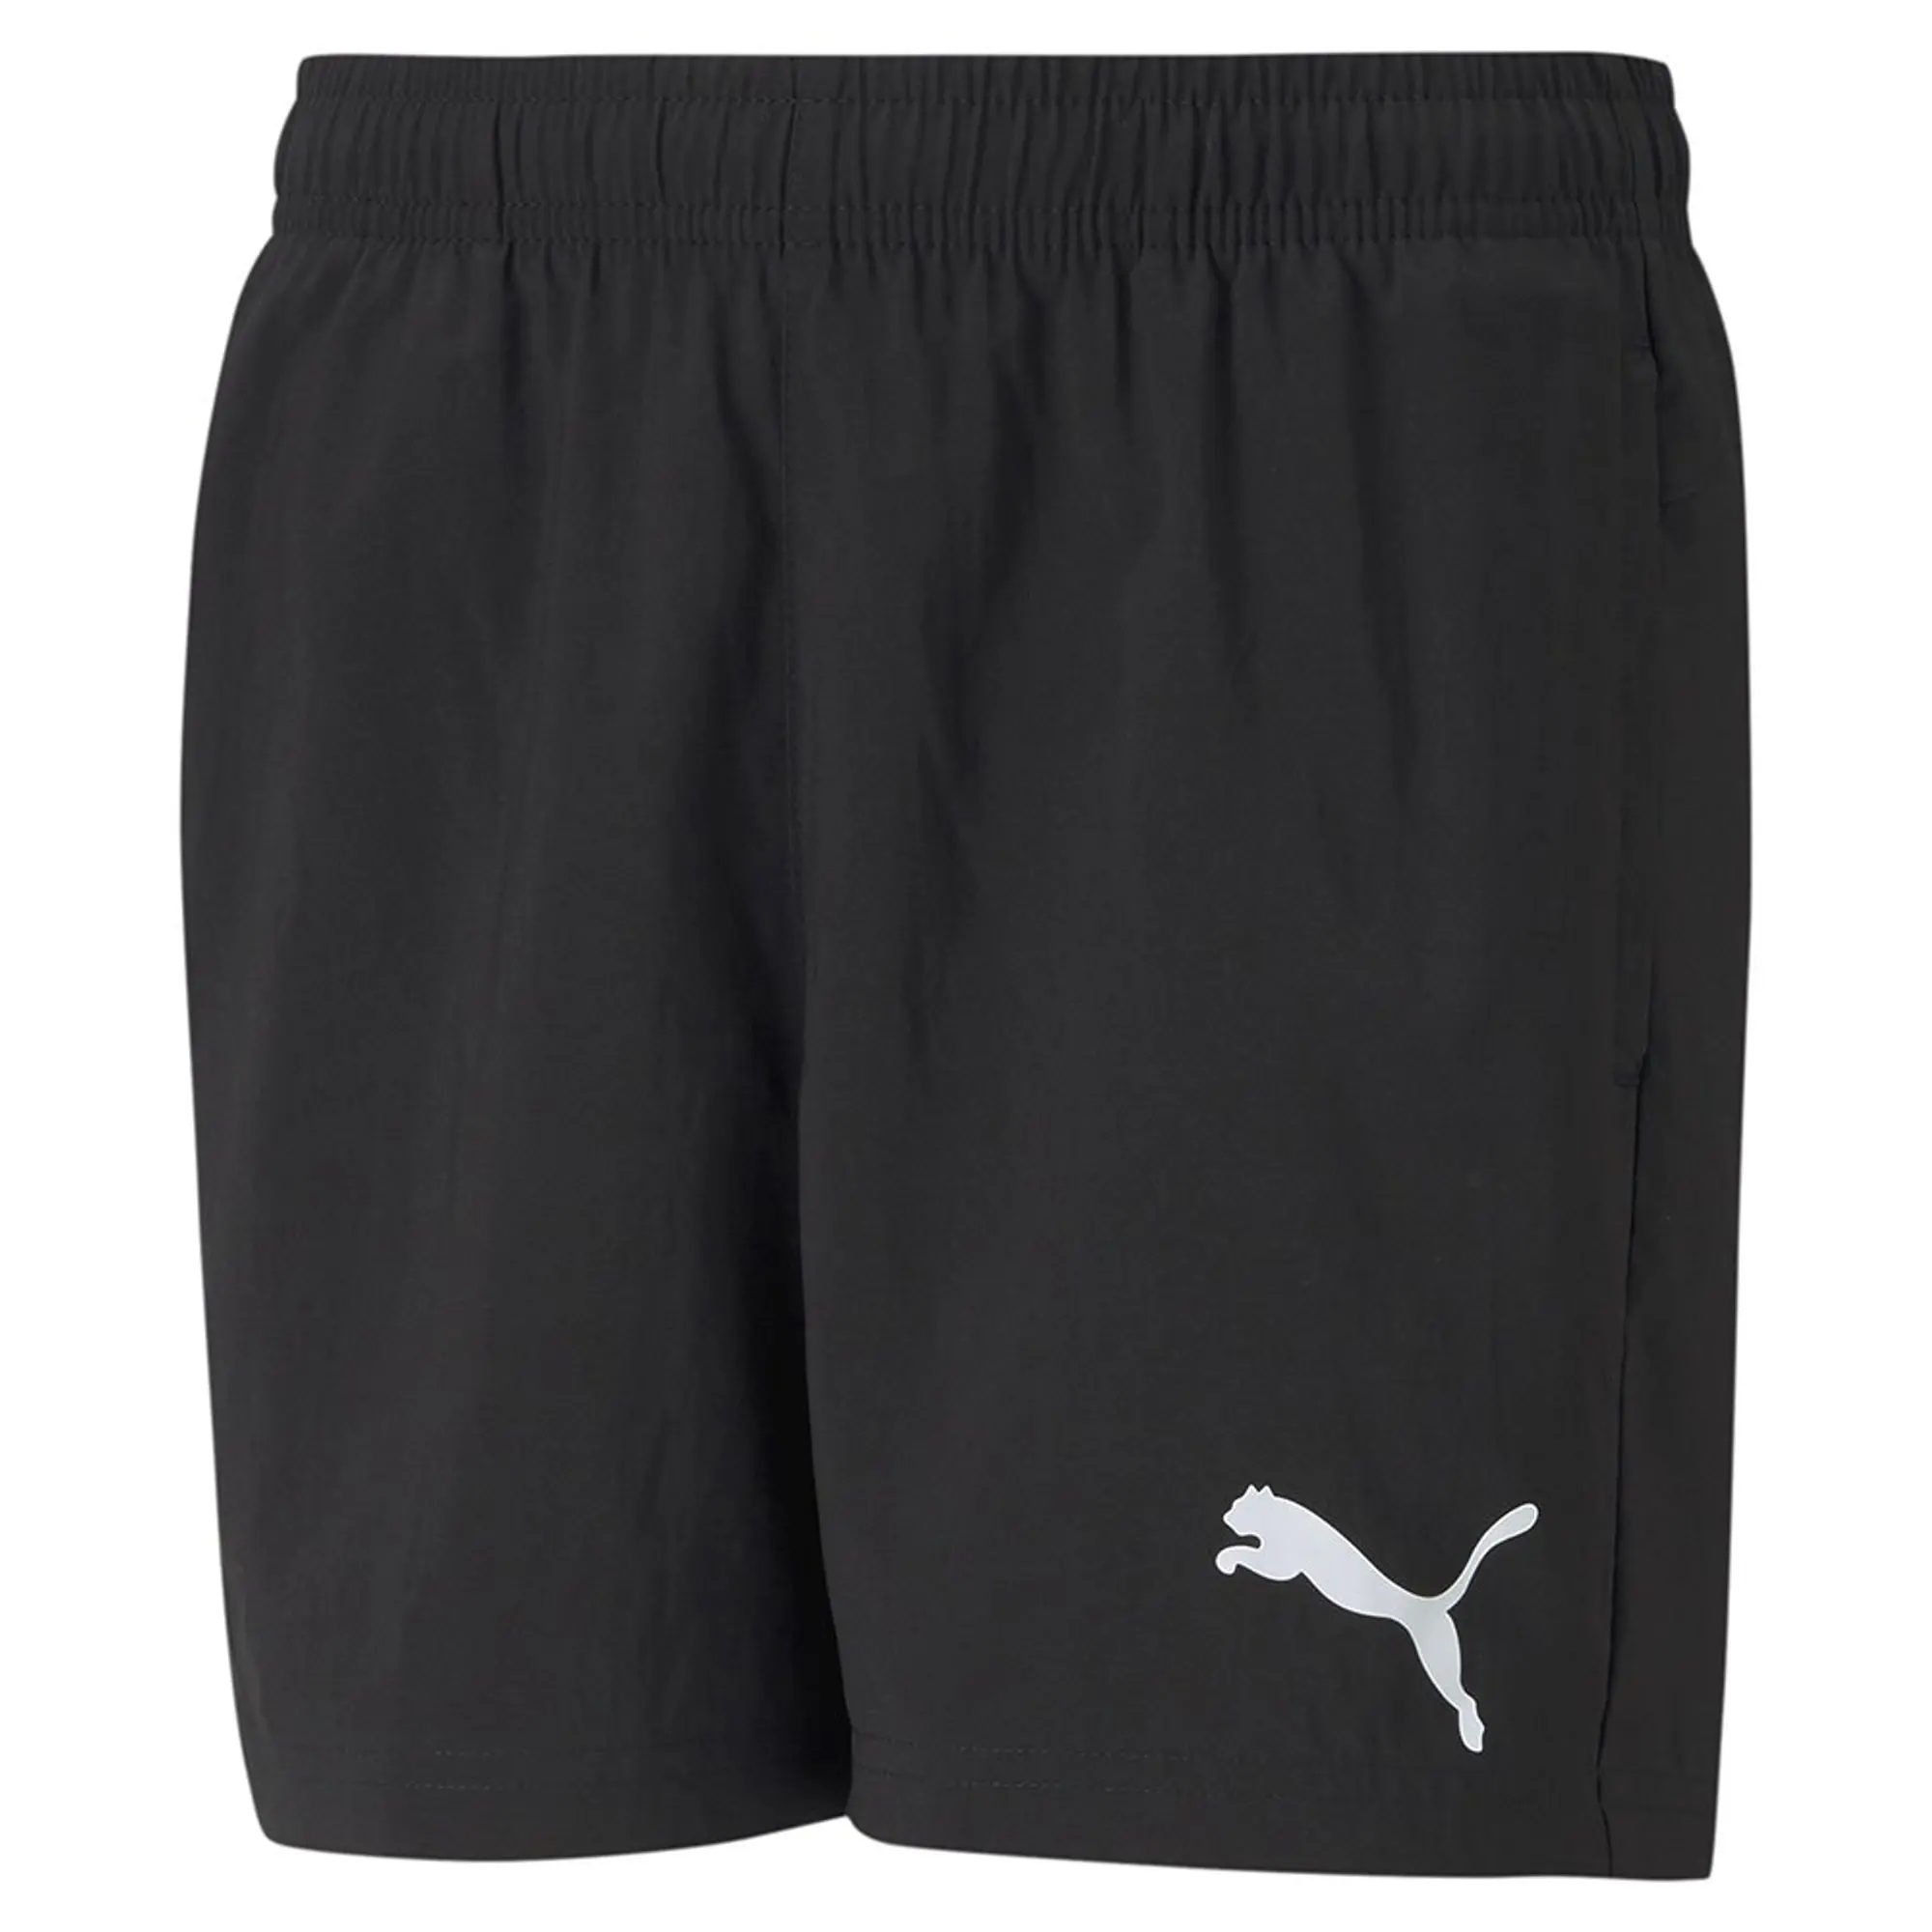 Puma Childrens Unisex Active Woven Youth Shorts - Black